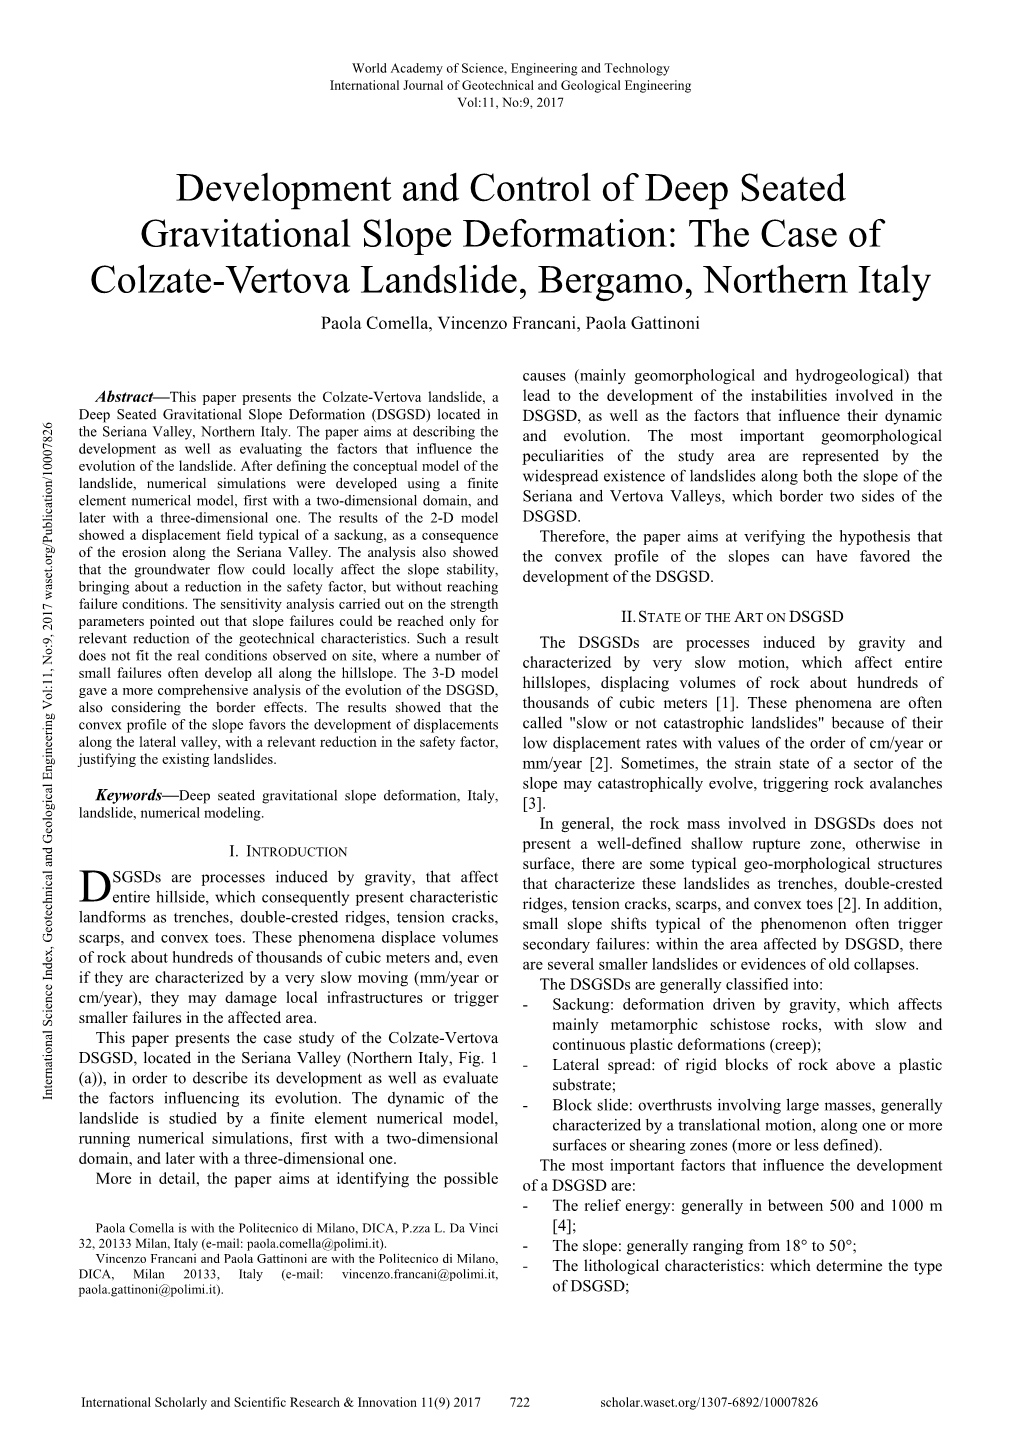 Development and Control of Deep Seated Gravitational Slope